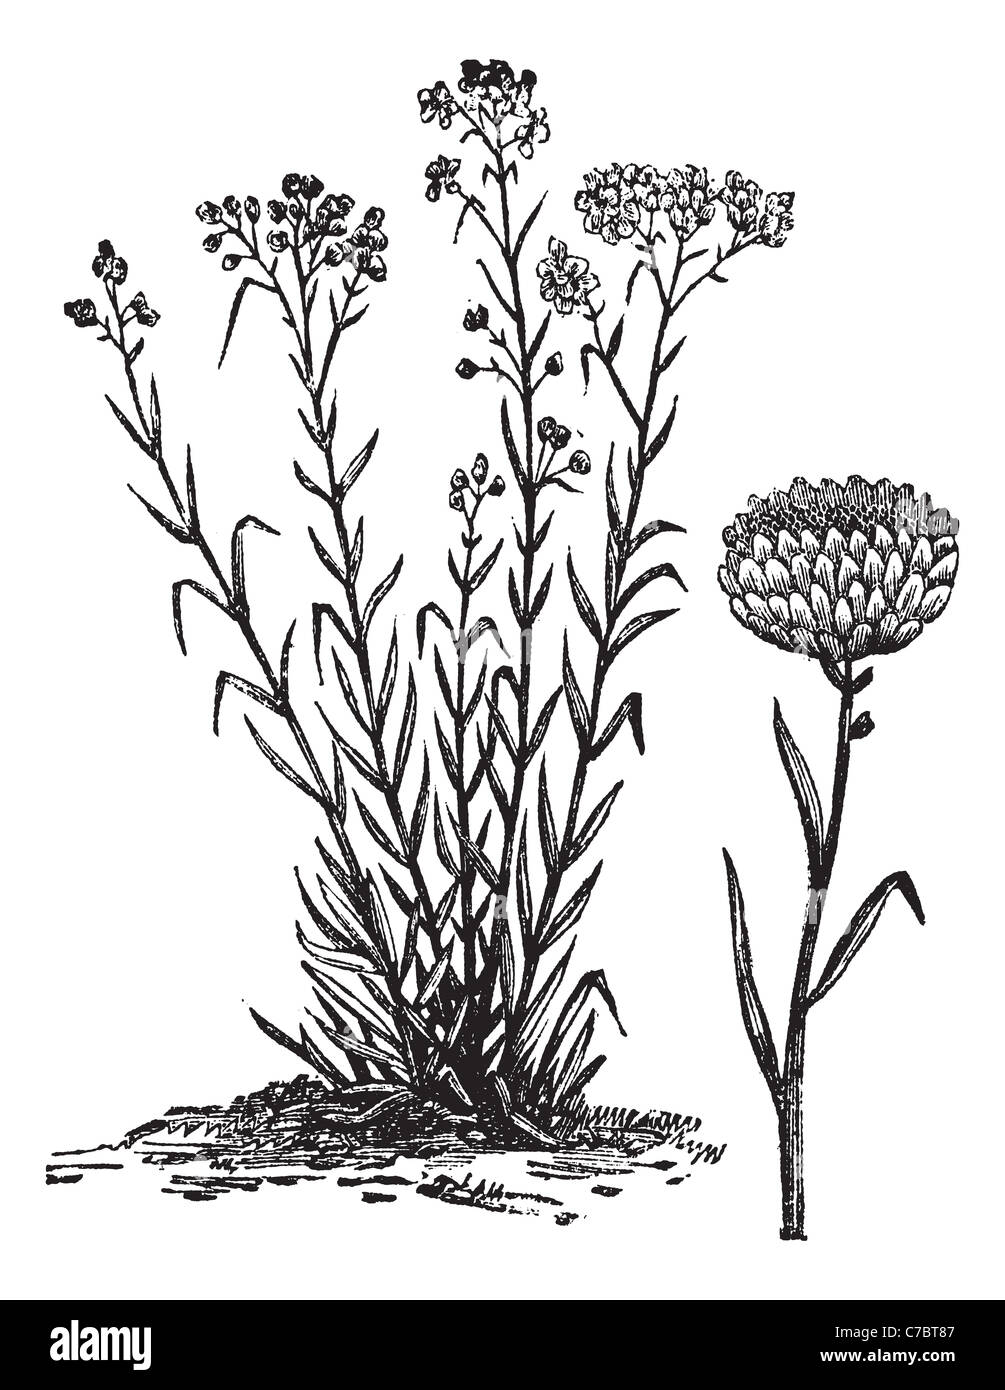 Helichrysum orientale, vintage engraving. Old engraved illustration of Helichrysum orientale with isolated flower. Stock Photo